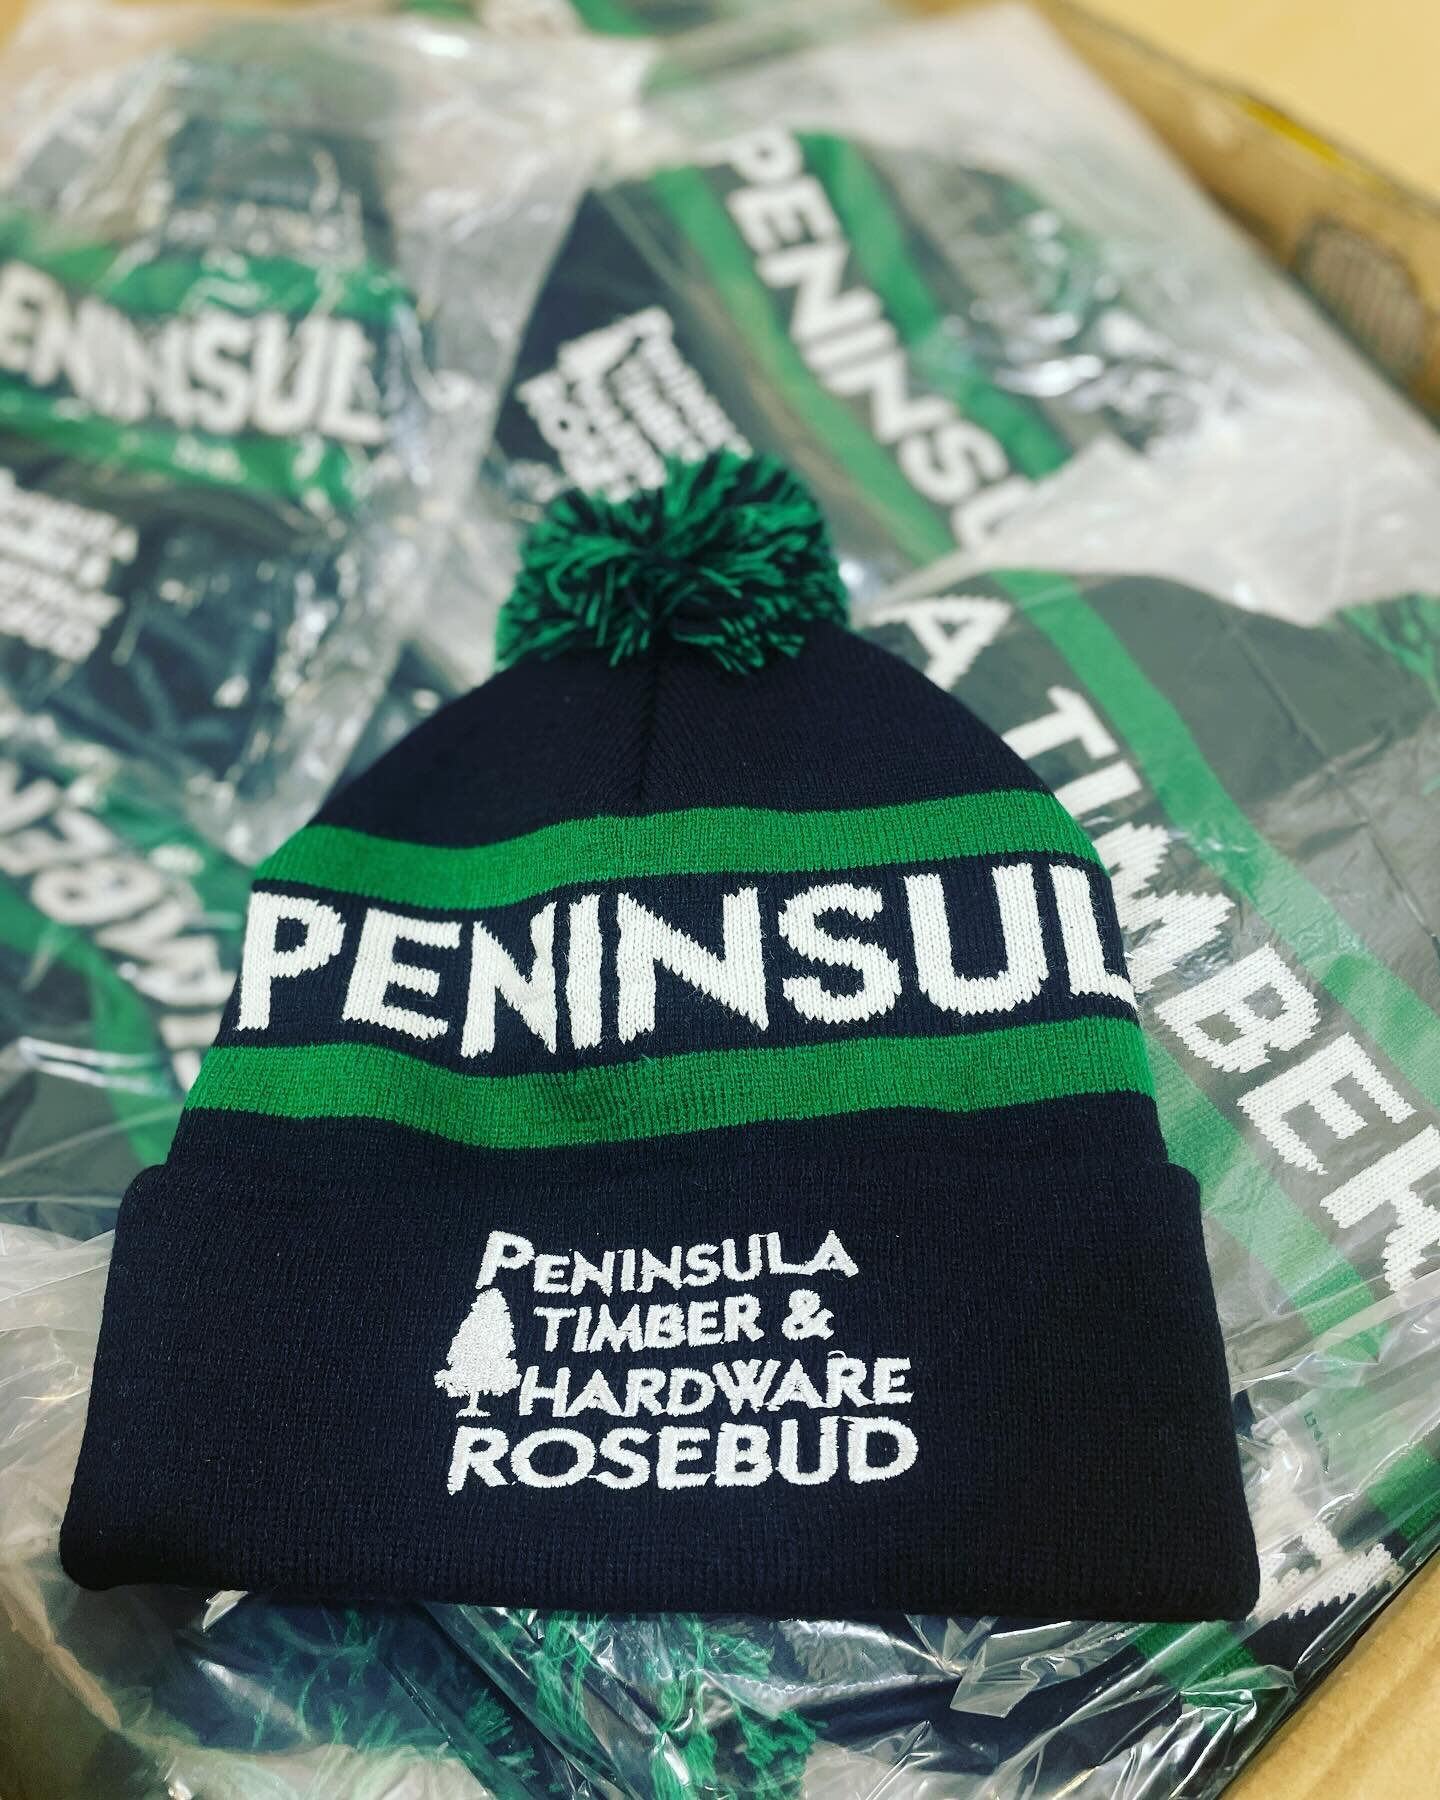 Due to crap Melbourne weather we are still producing custom knitted beanies😂😂😂. Hit us up to keep your heads warm this &ldquo;summer&rdquo;. #customheadwear #knittedbeanies #merch #mornintonpeninsula #rosebud #timber #rosebudtimber #embroidery #he